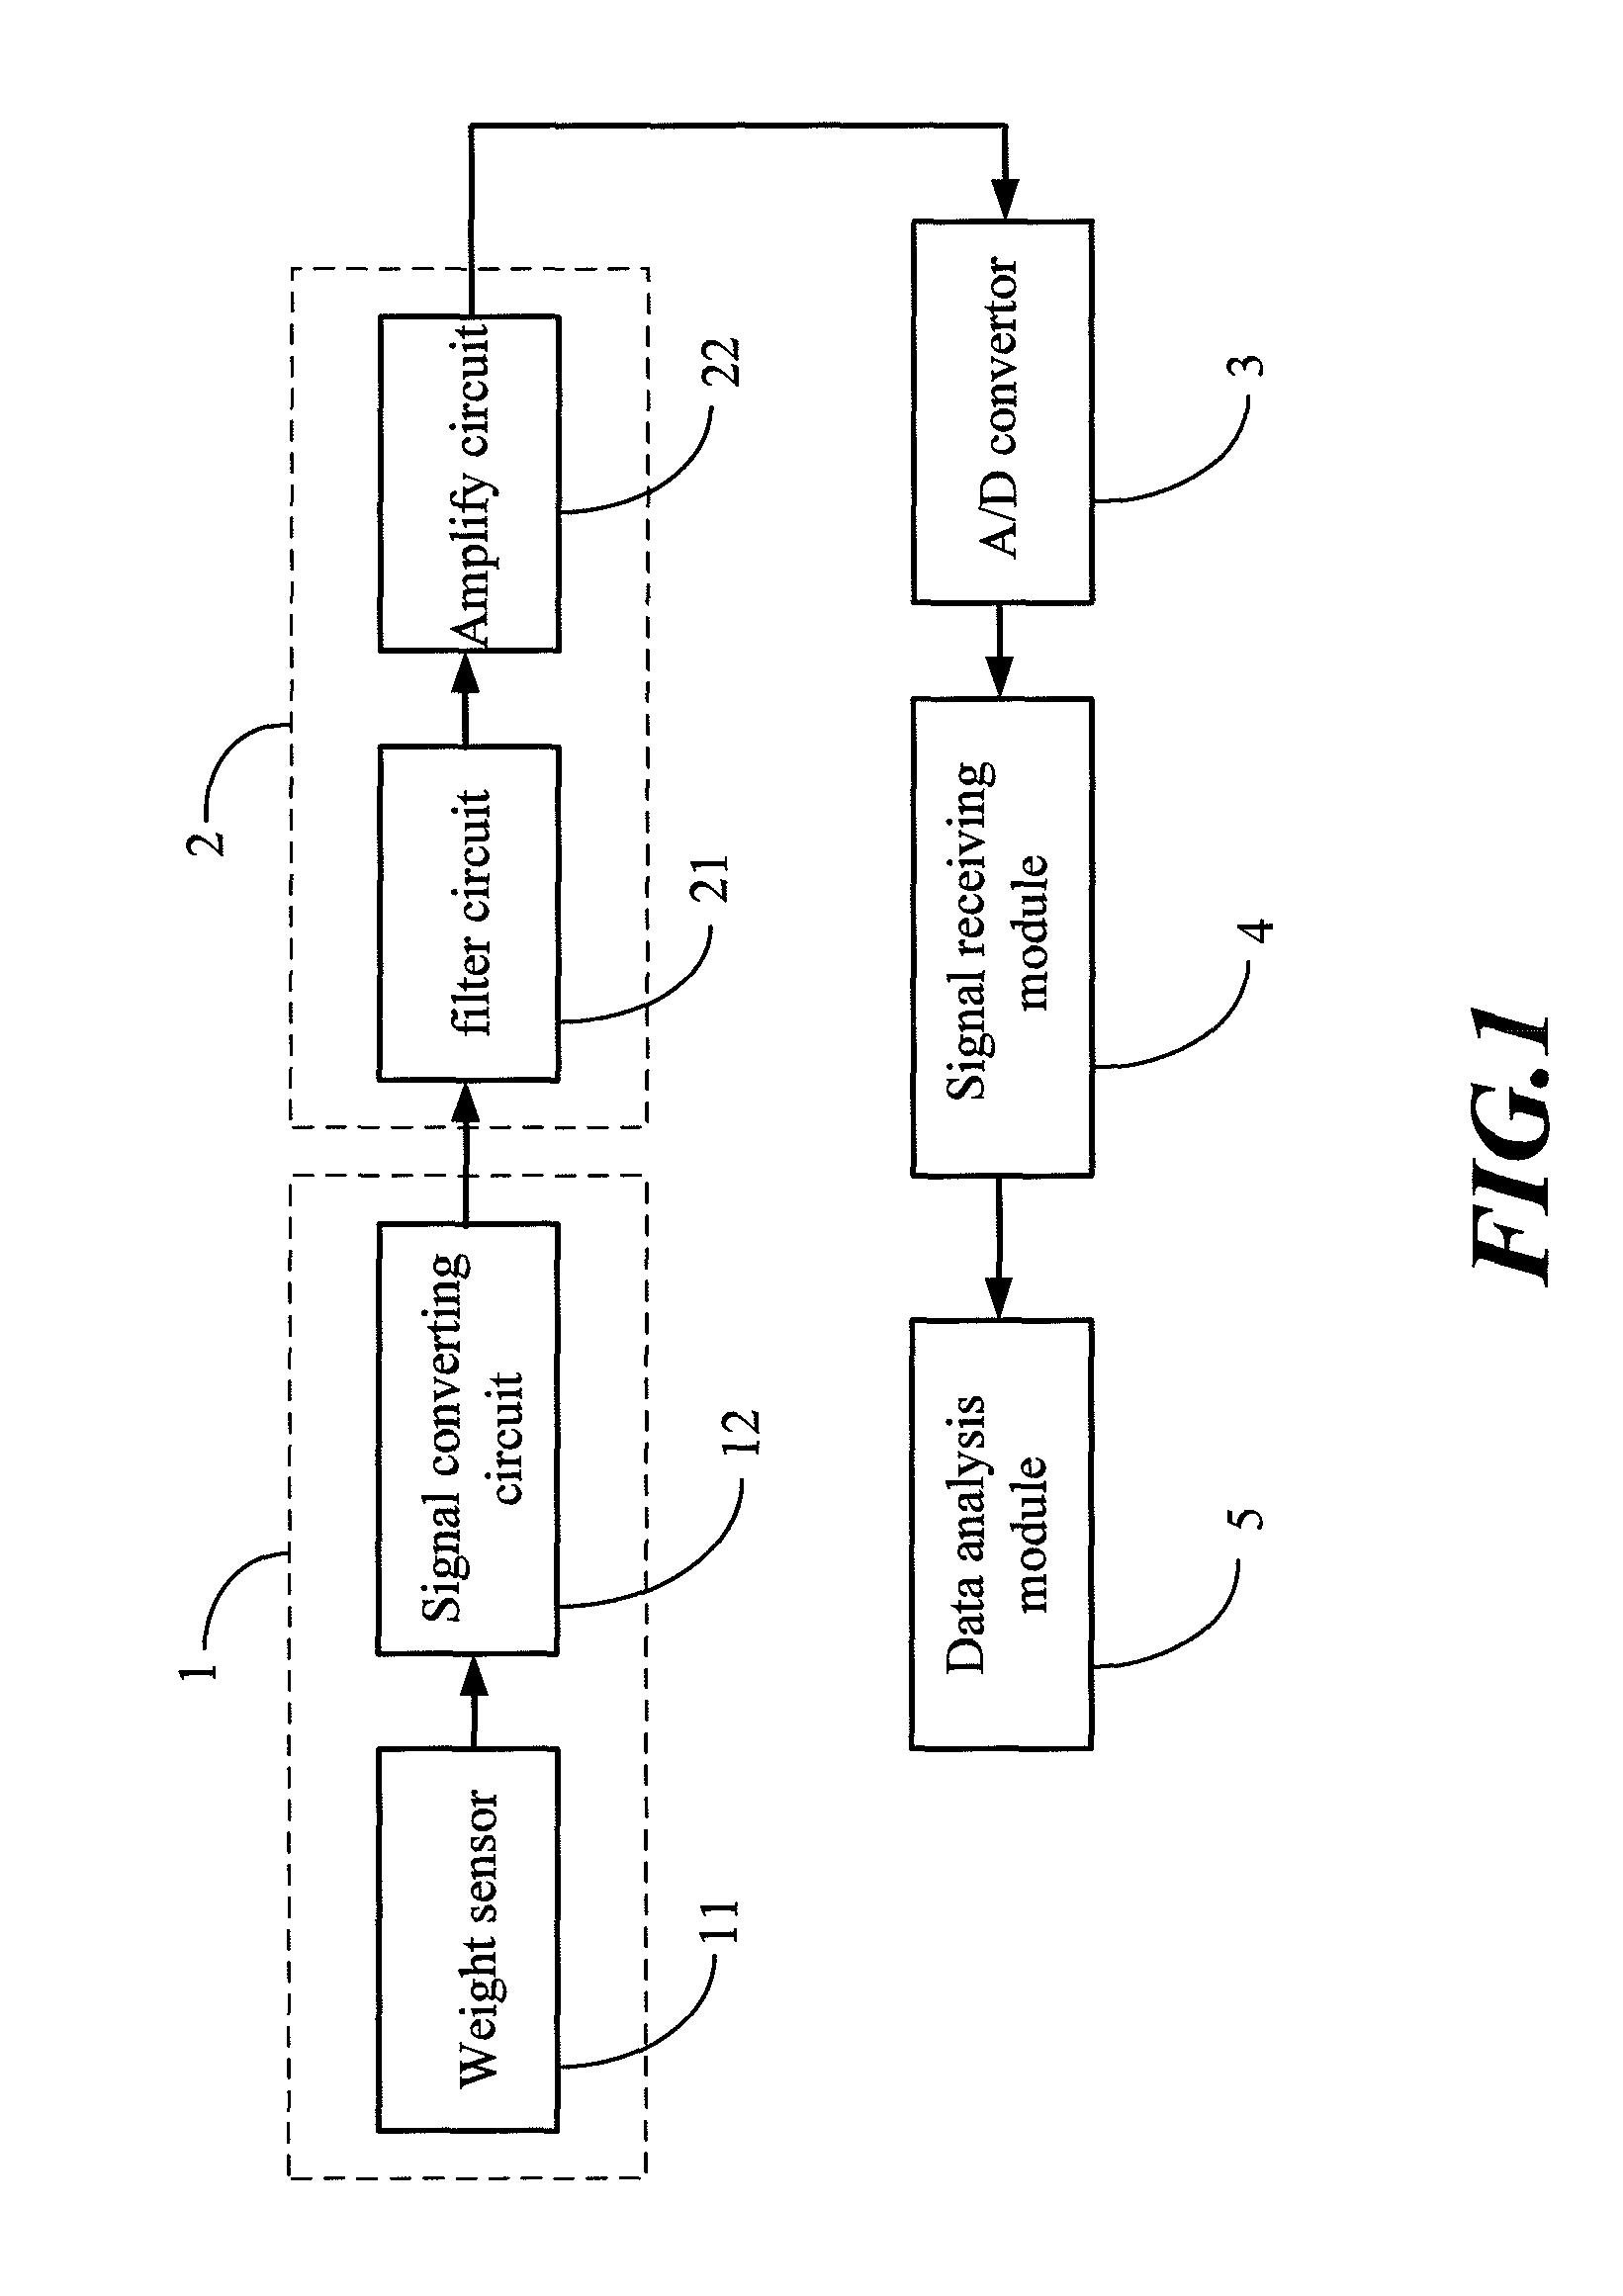 System for measuring body balance signals and a method for analyzing the same